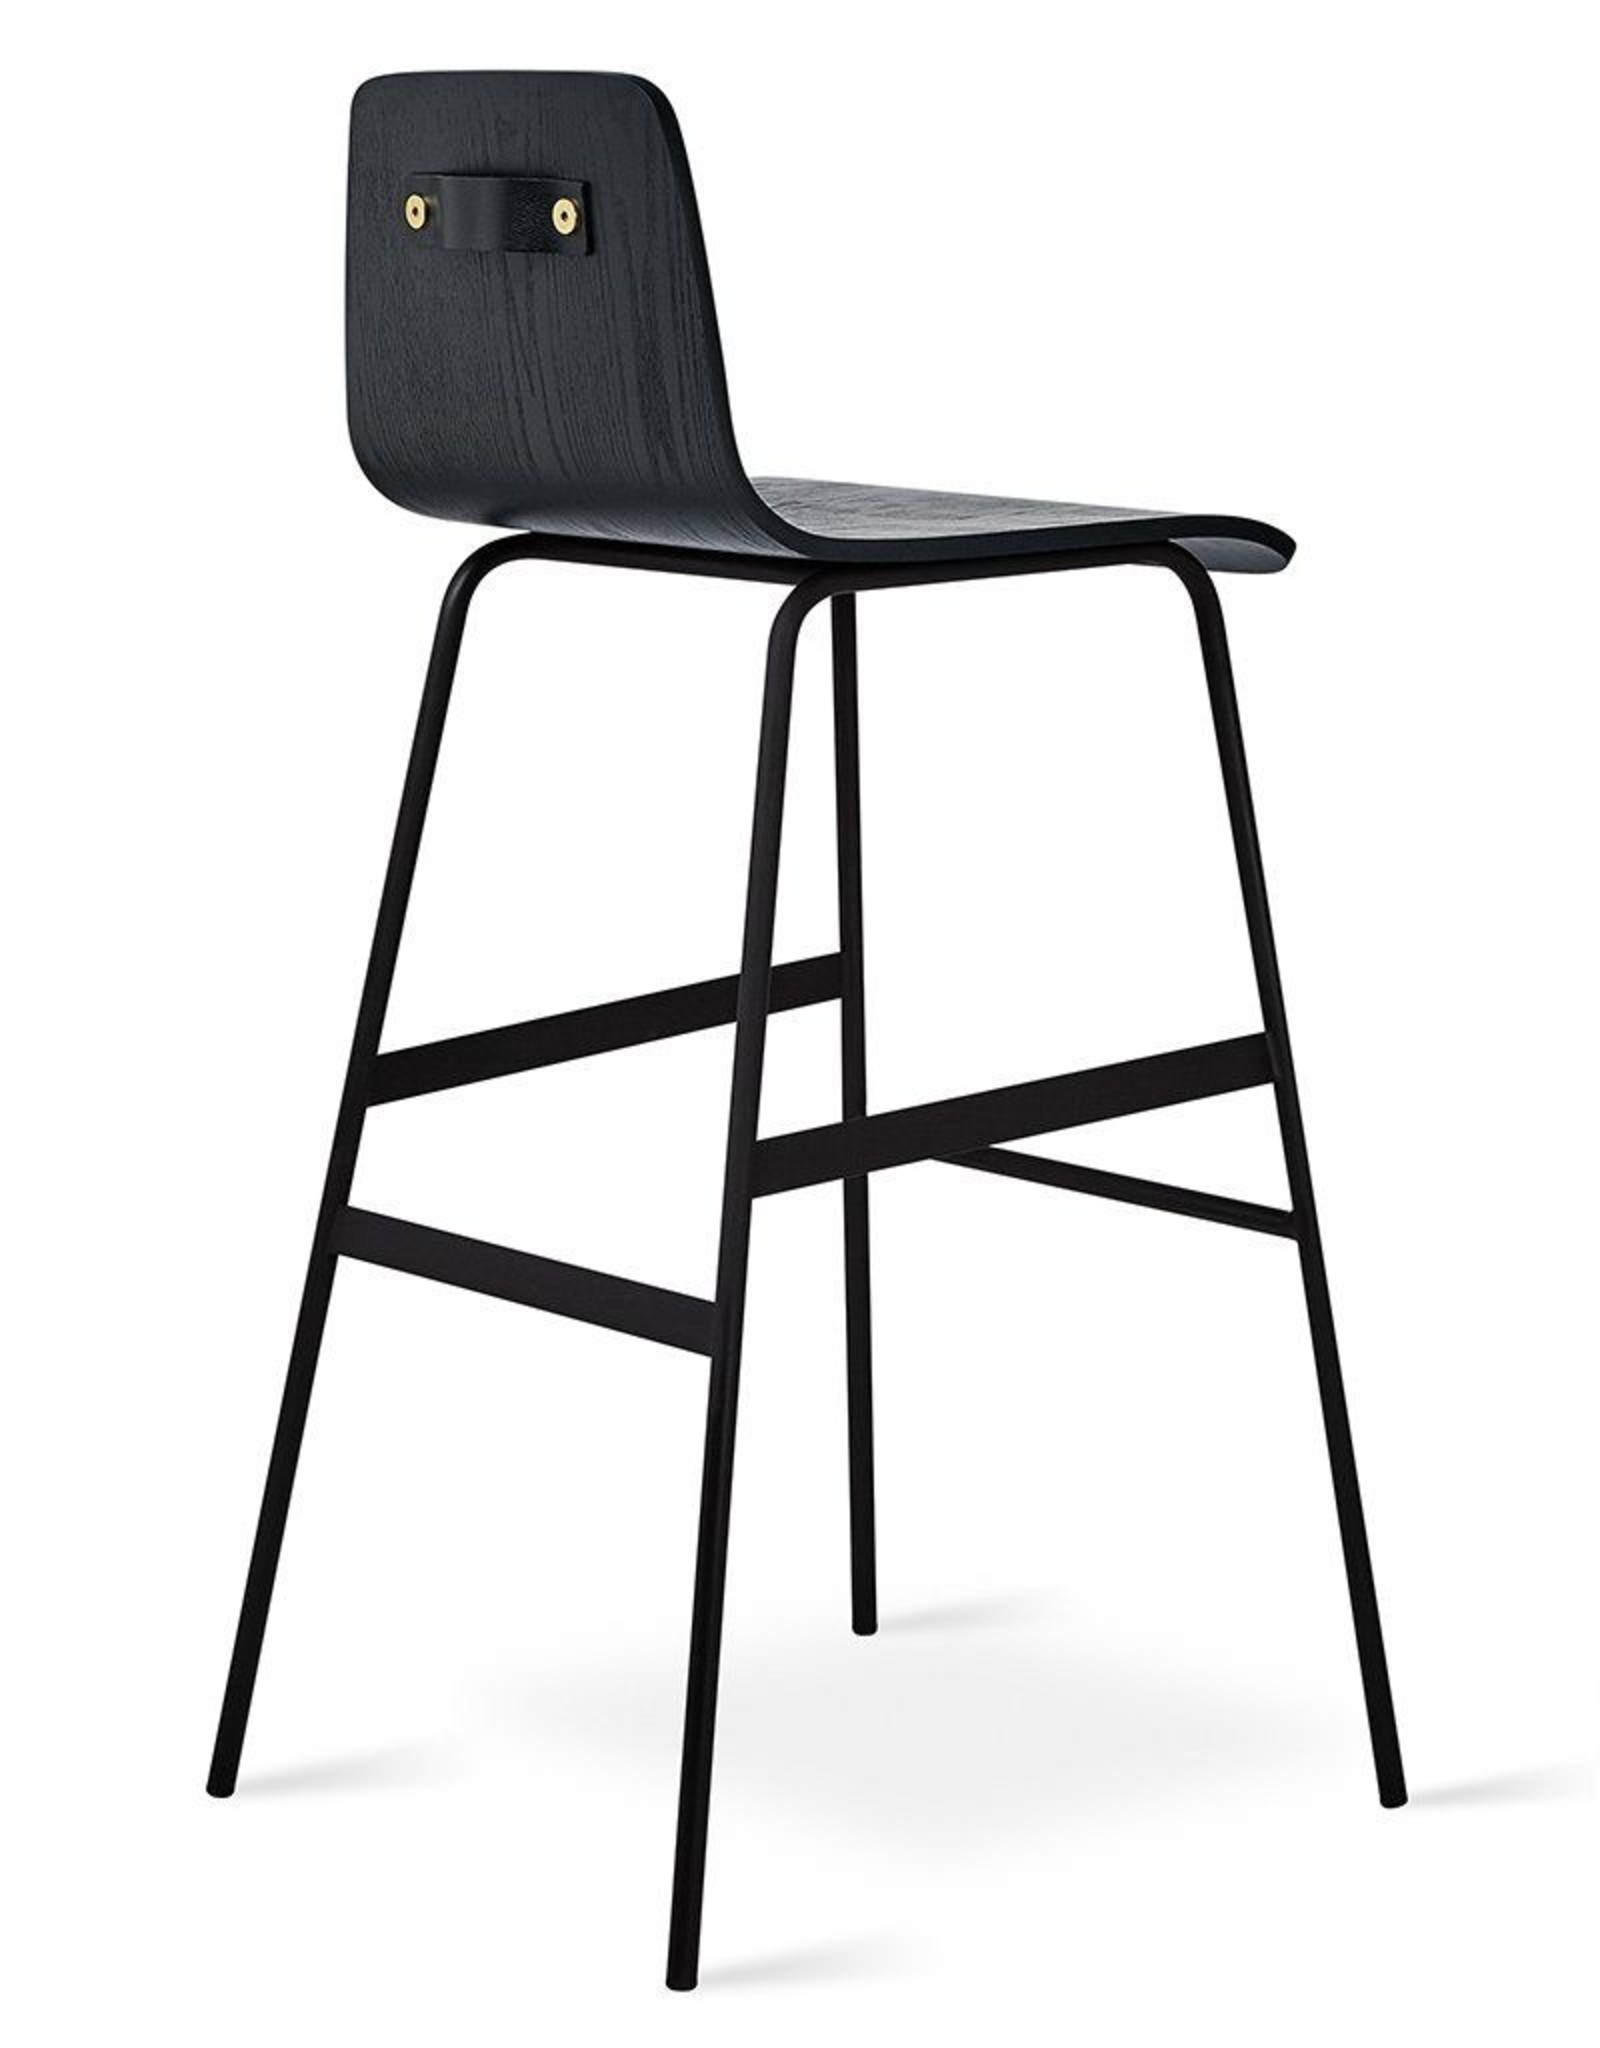 Gus* Modern Lecture Barstool